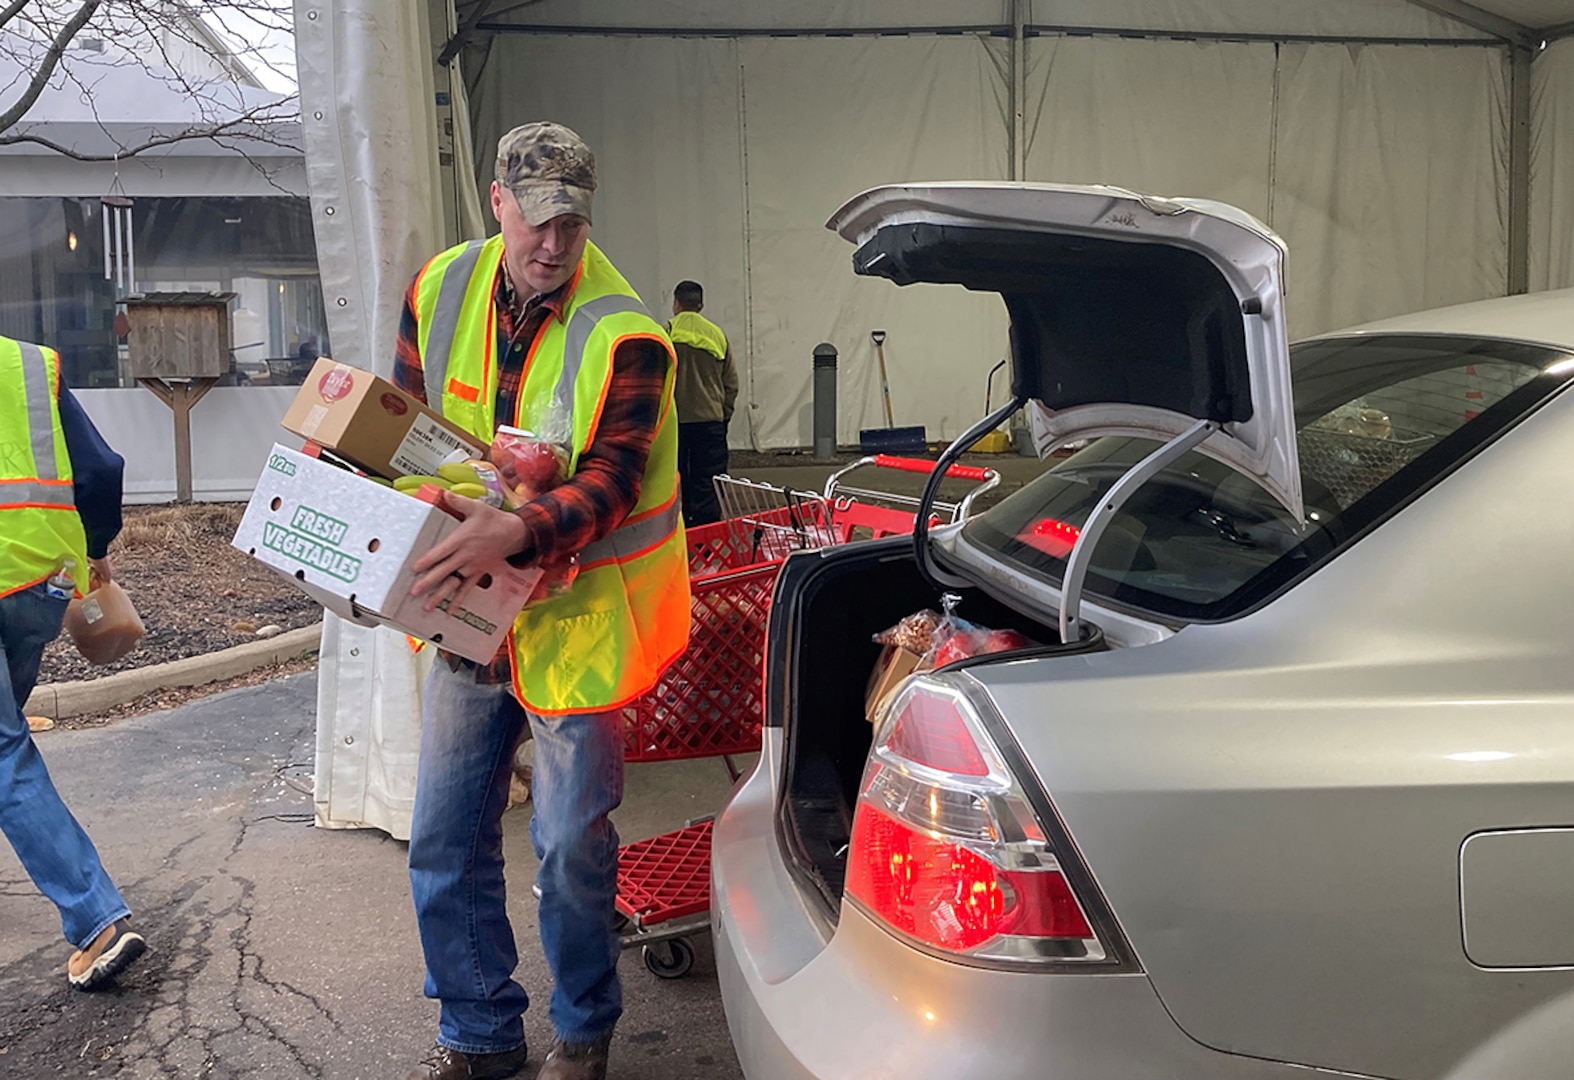 A man in a a yellow reflective vest and jeans wearing a ballcap loads a car trunk with food.